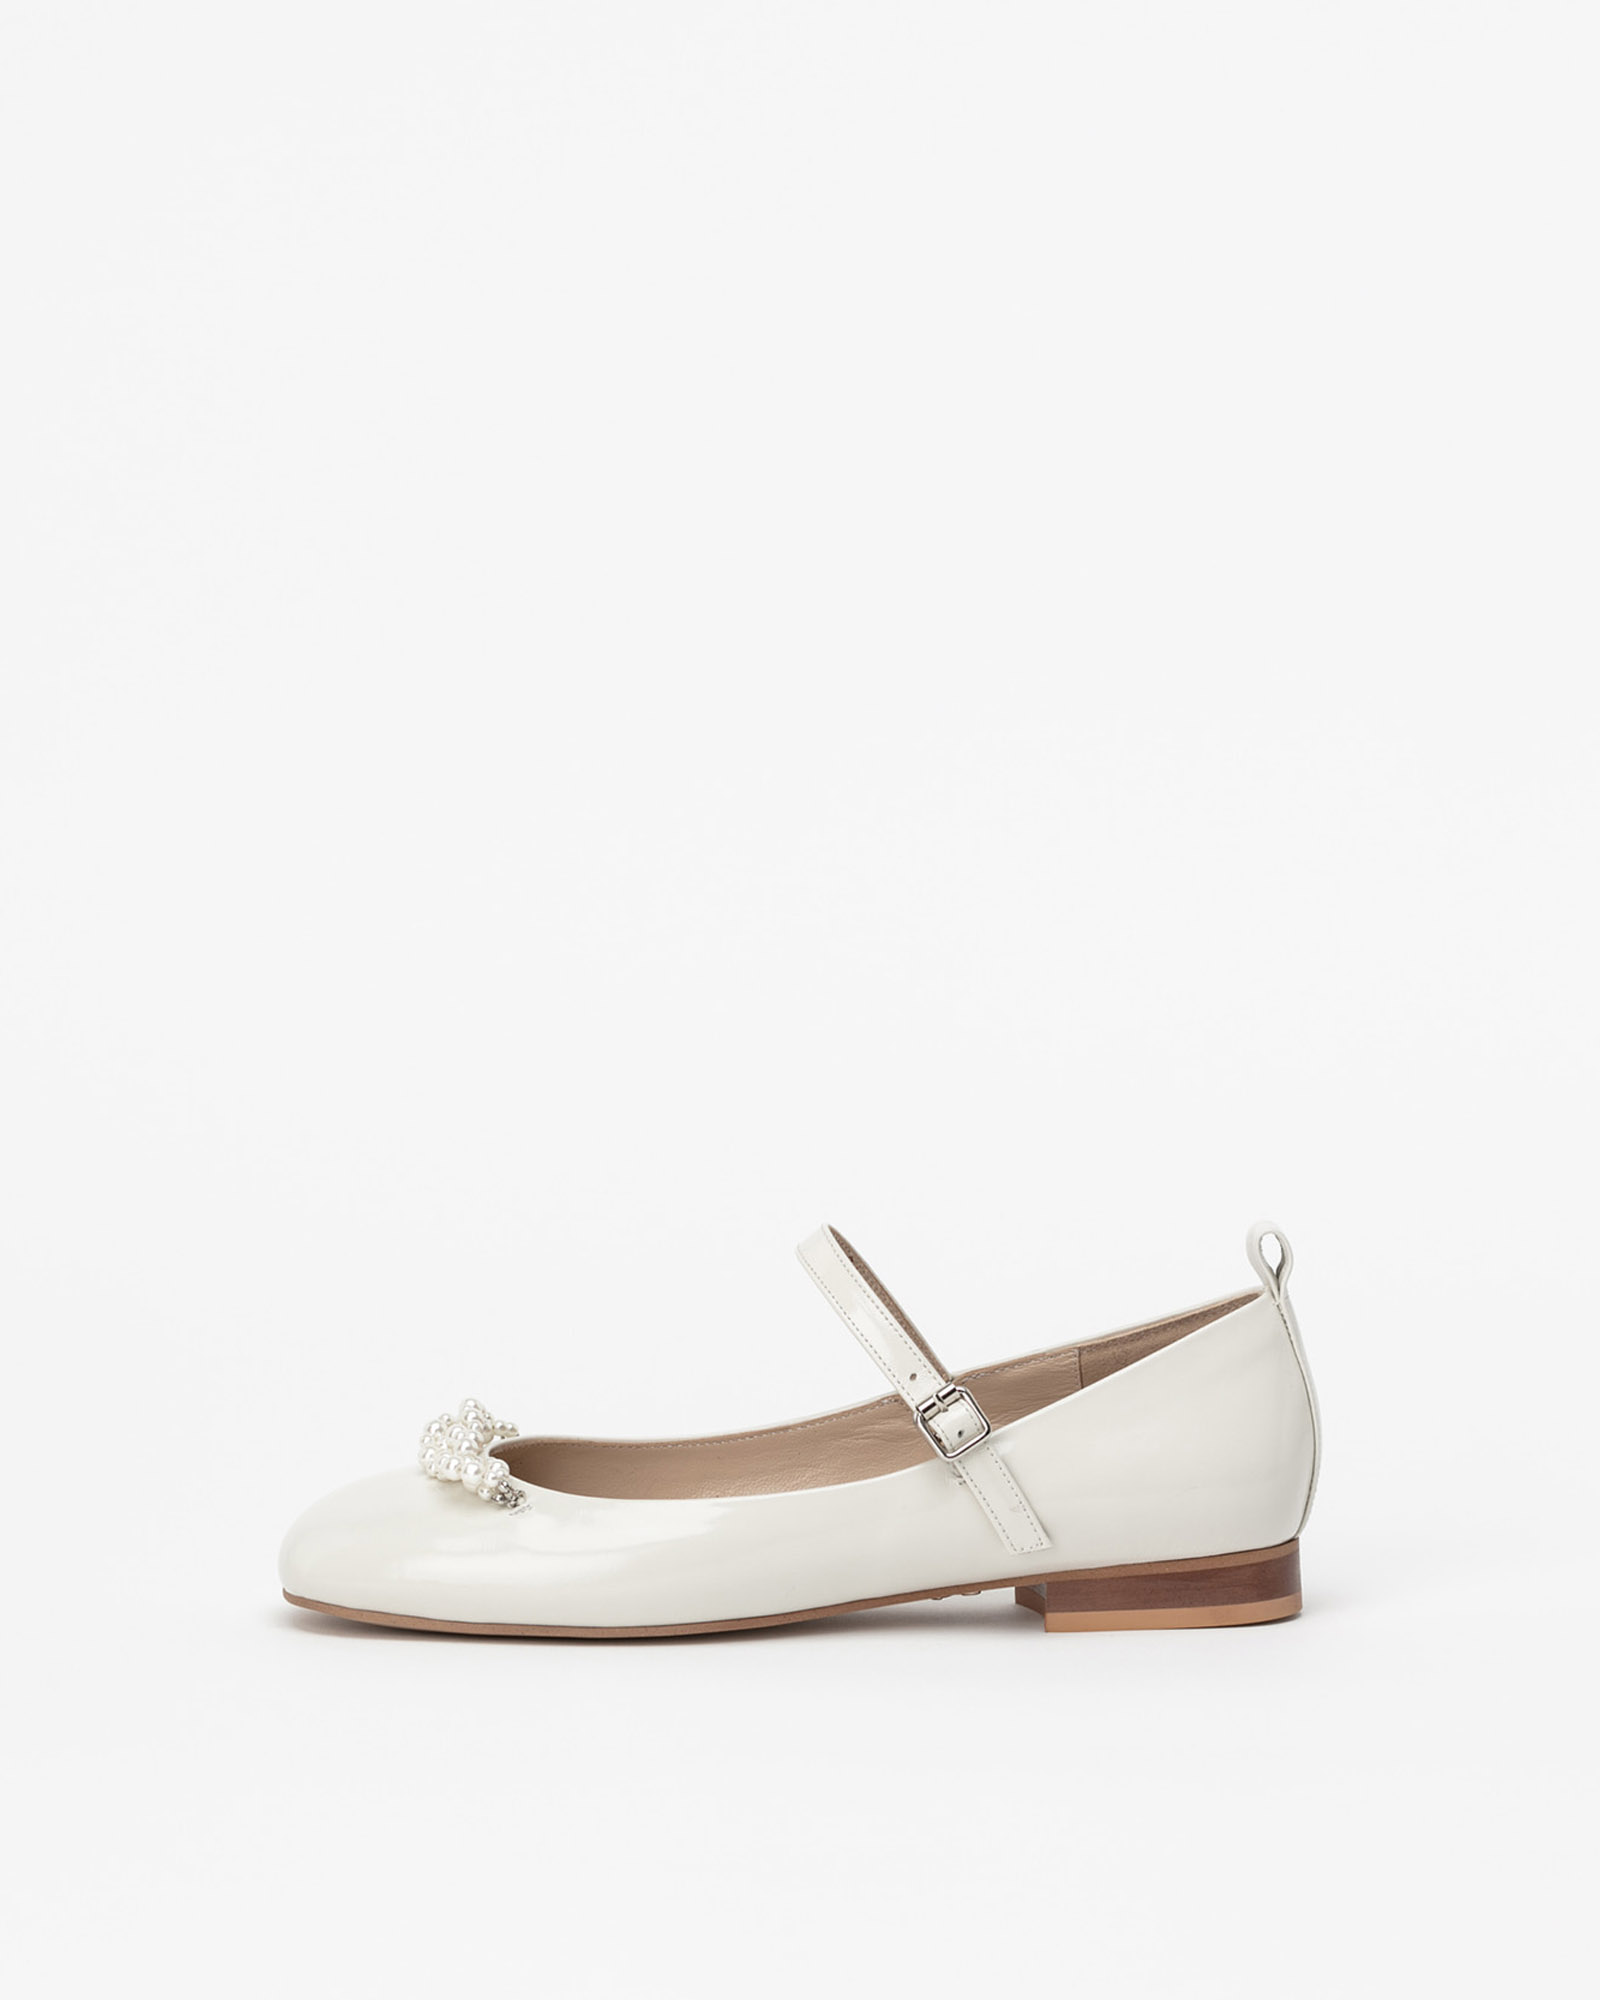 Suelle Embellished Maryjane Flats in Textured Ivory